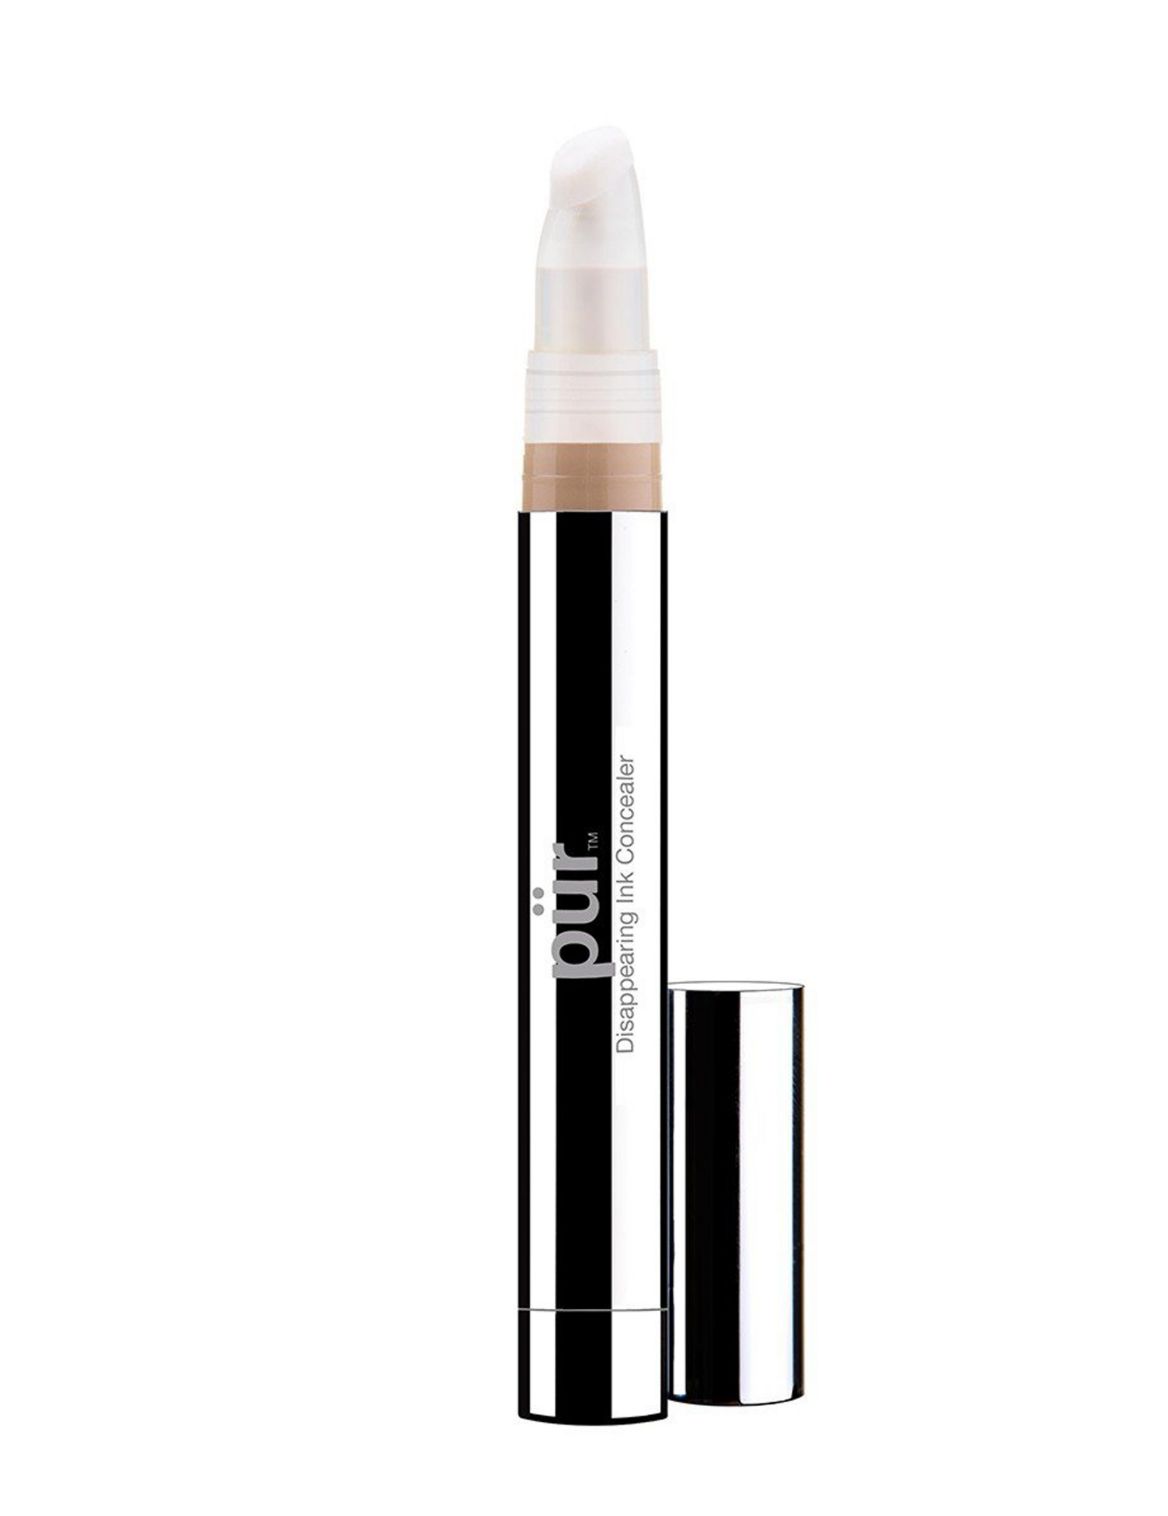 Disappearing Act 4-in-1 Concealer 2.8g beige